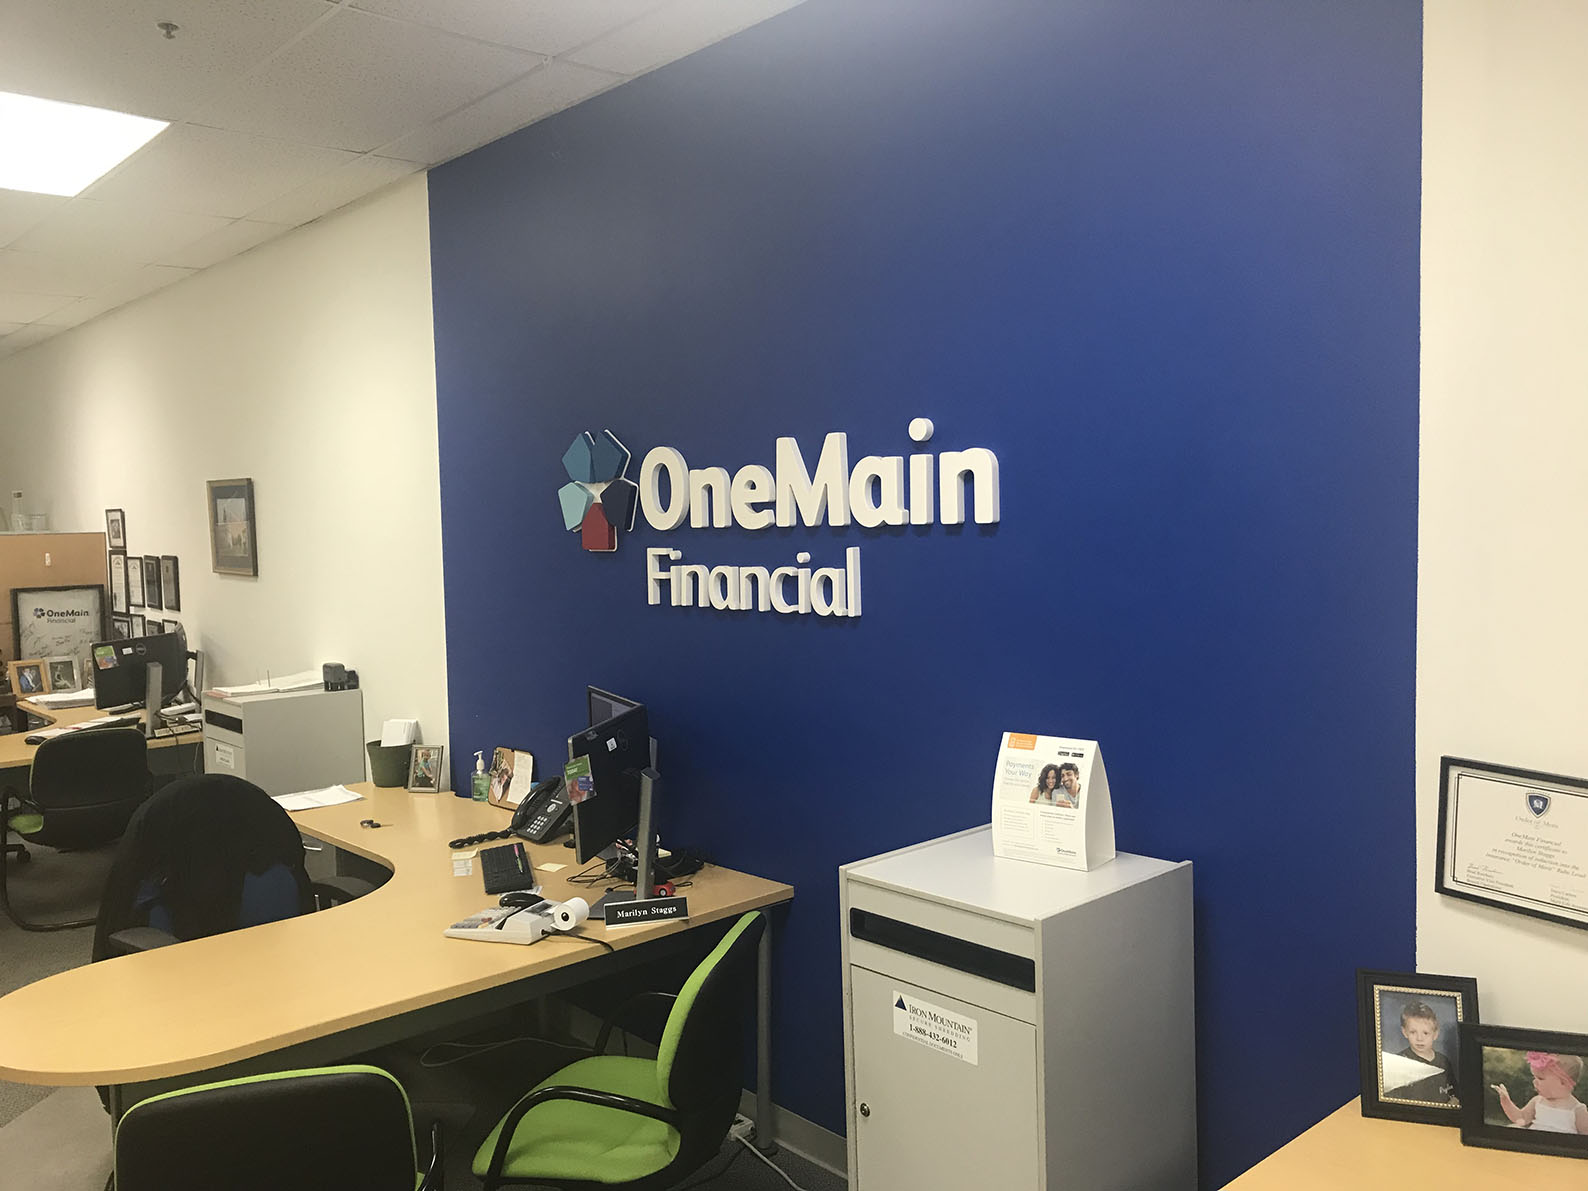 OneMain Financial 405 Market Square Dr, Maysville Kentucky 41056